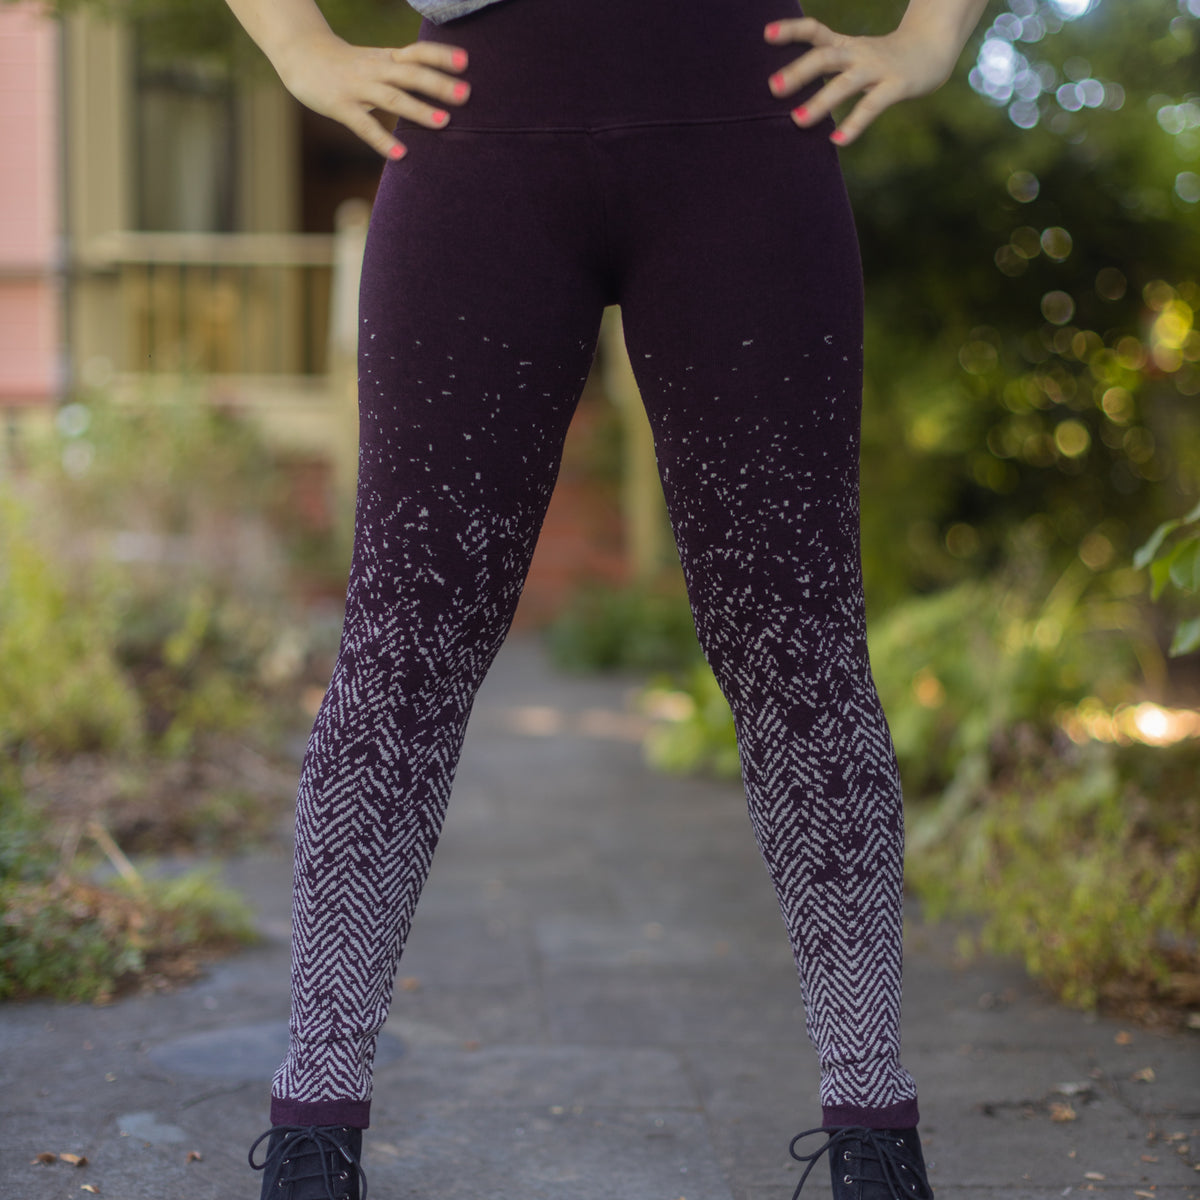 Strange and Cozy Rise Above the Noise Spandex Leggings XS - XXL 